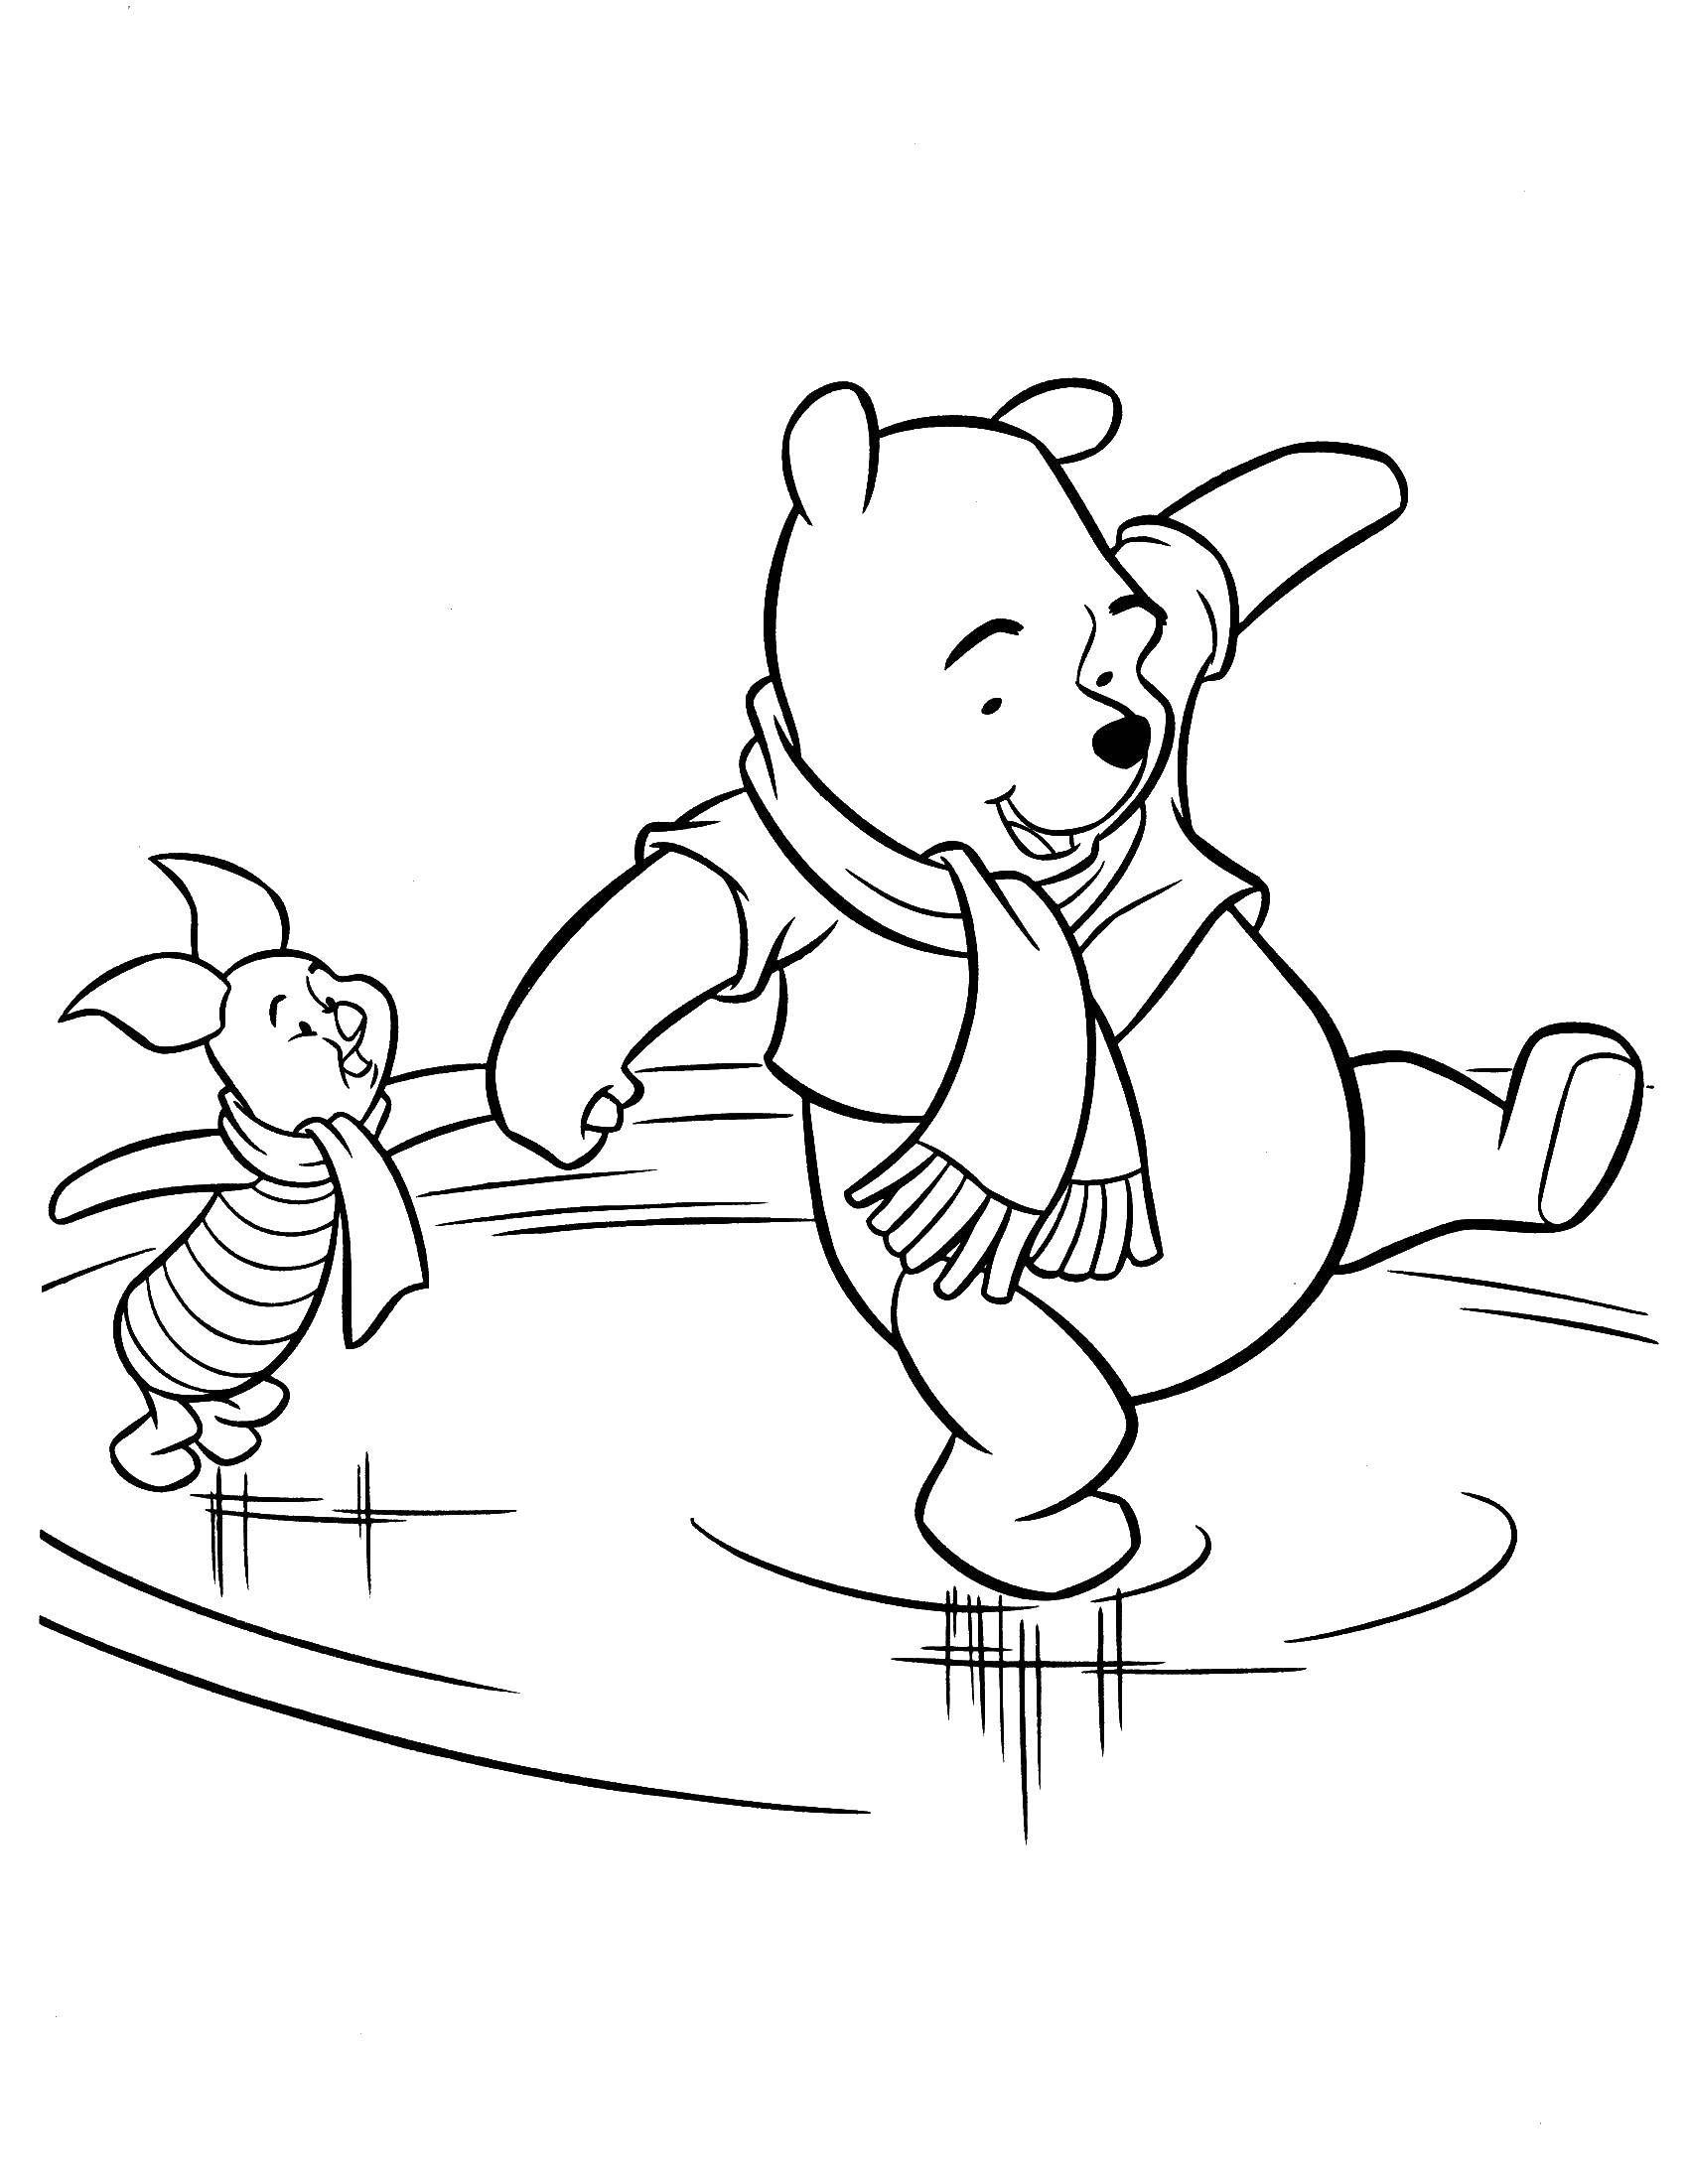 Coloring Winnie the Pooh and heels at the rink. Category Disney cartoons. Tags:  Disney honey, Winnie the Pooh, Piglet.